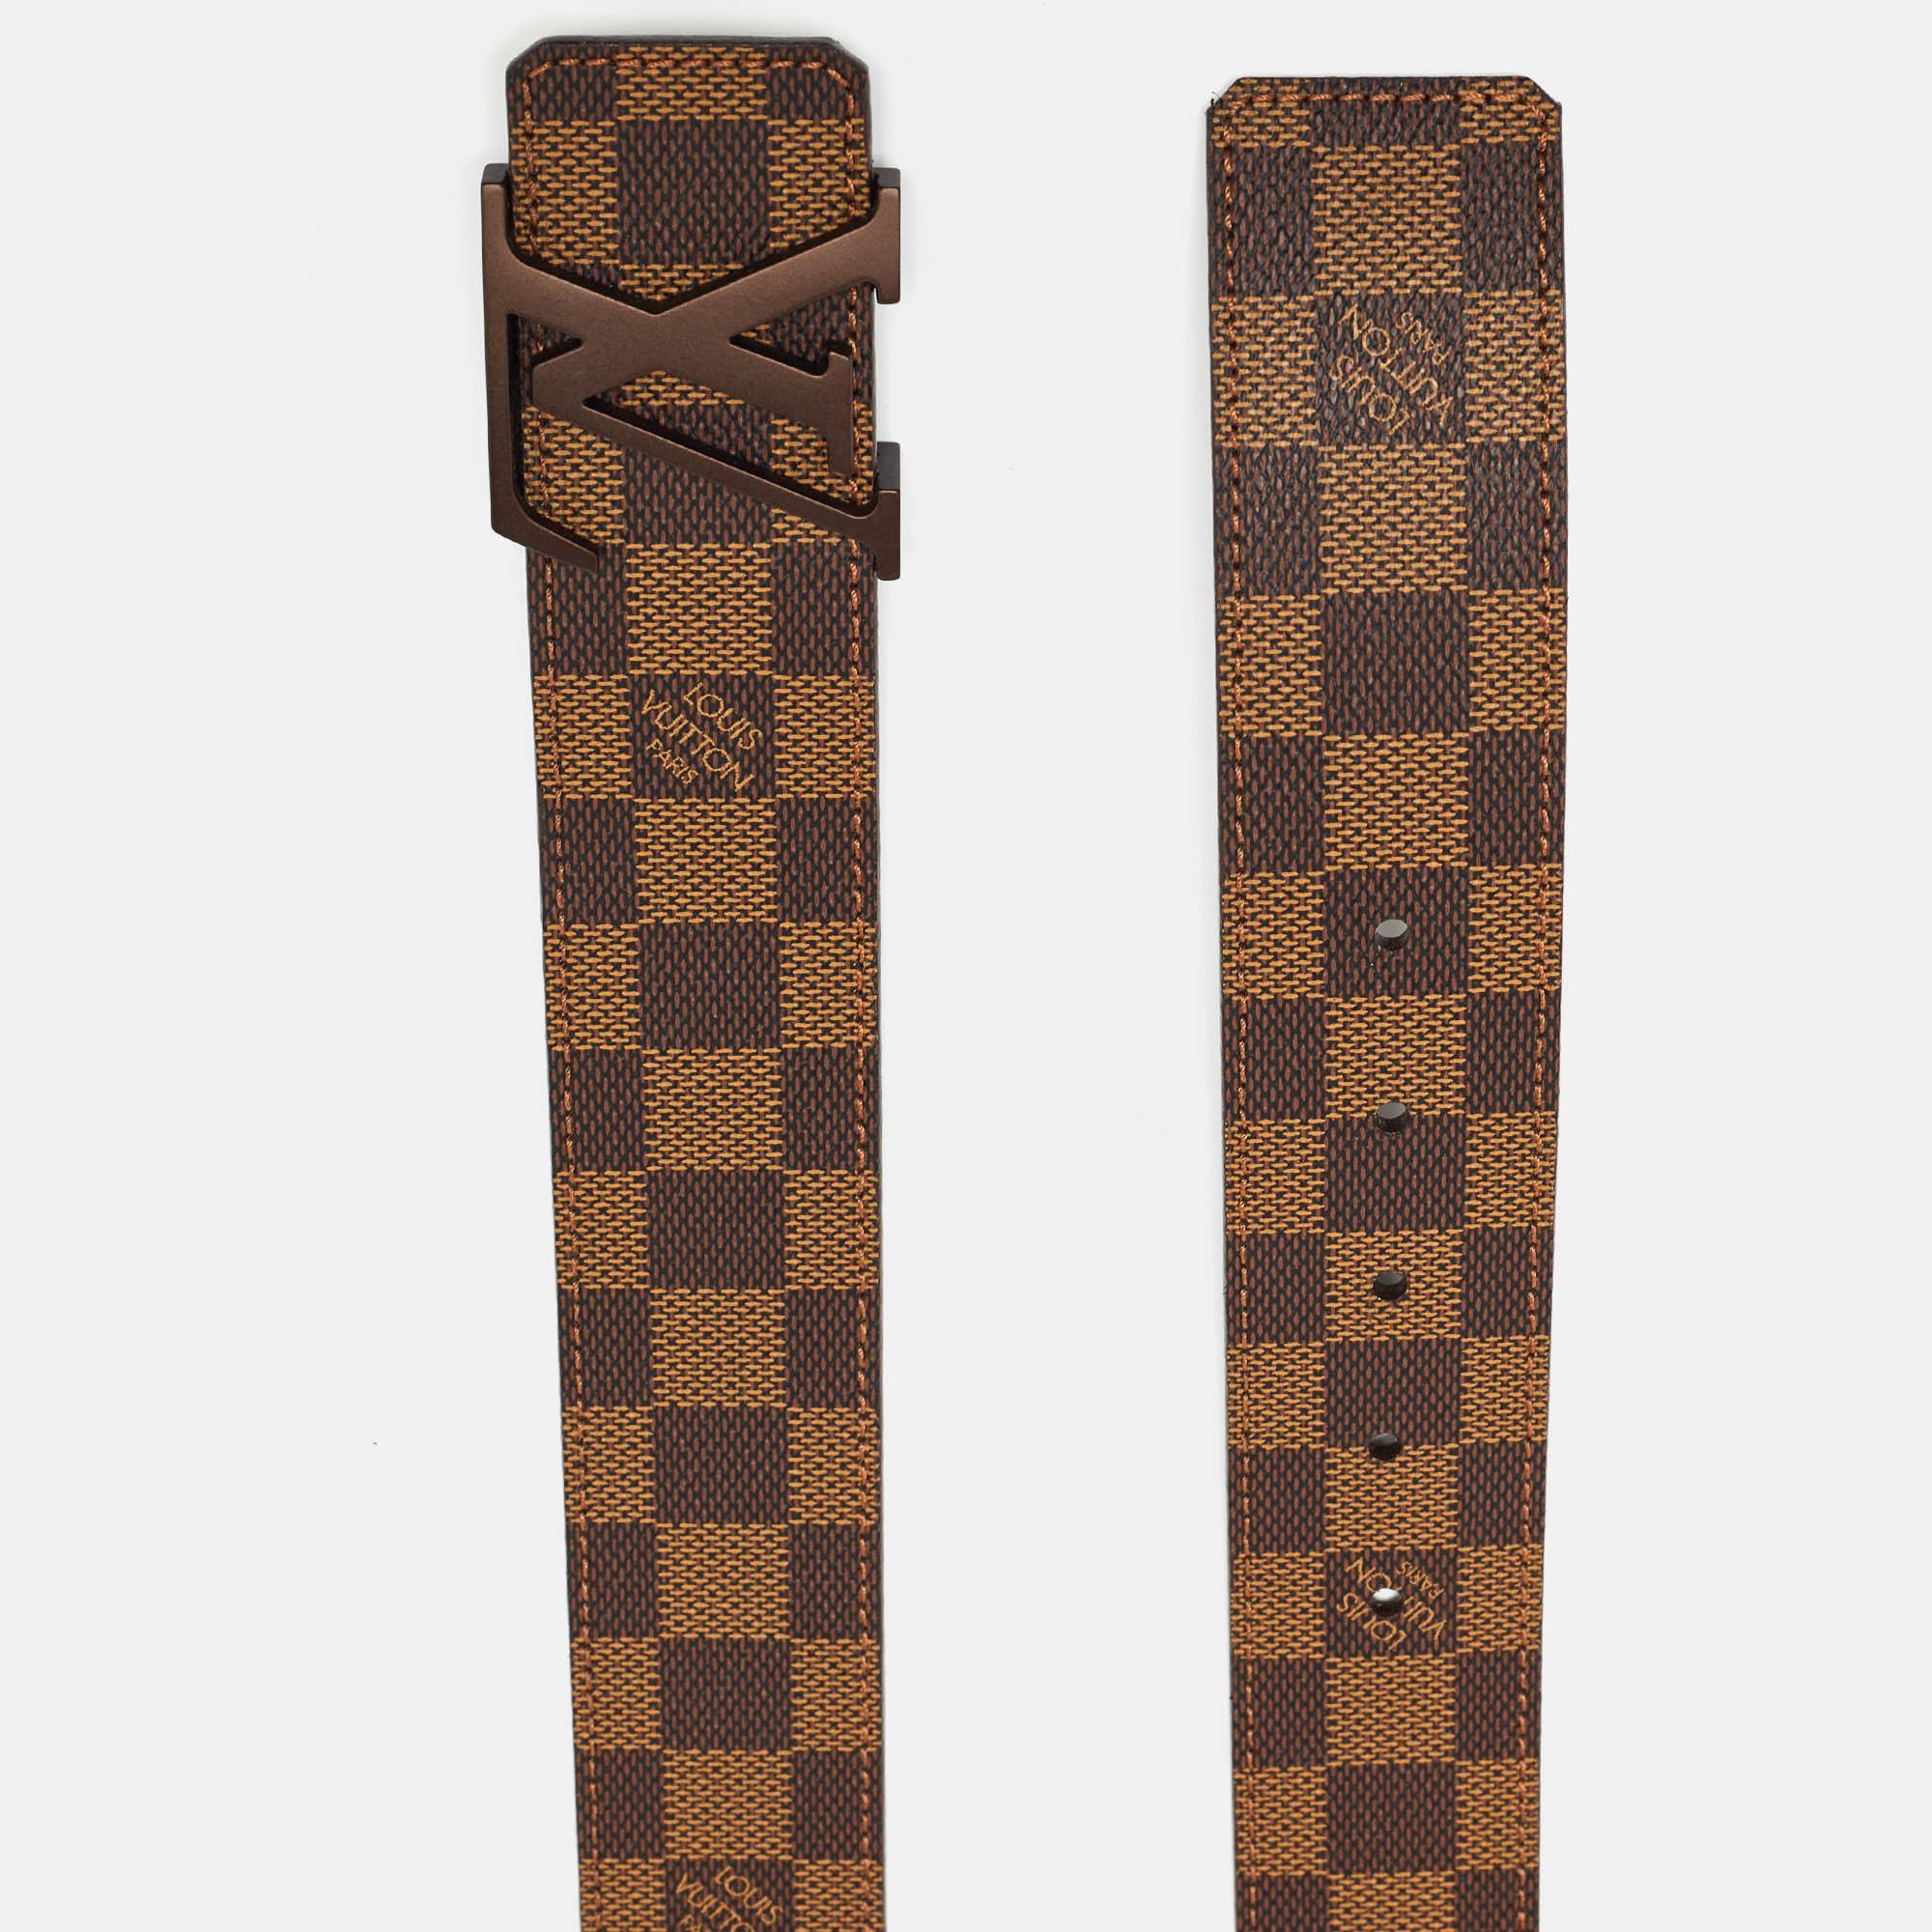 This belt from Louis Vuitton has an appealing design. The designer belt has a sturdy buckle that can be easily fastened and unfastened. The belt is perfect to adorn your waist and for making a style statement.

Includes
Original Dustbag